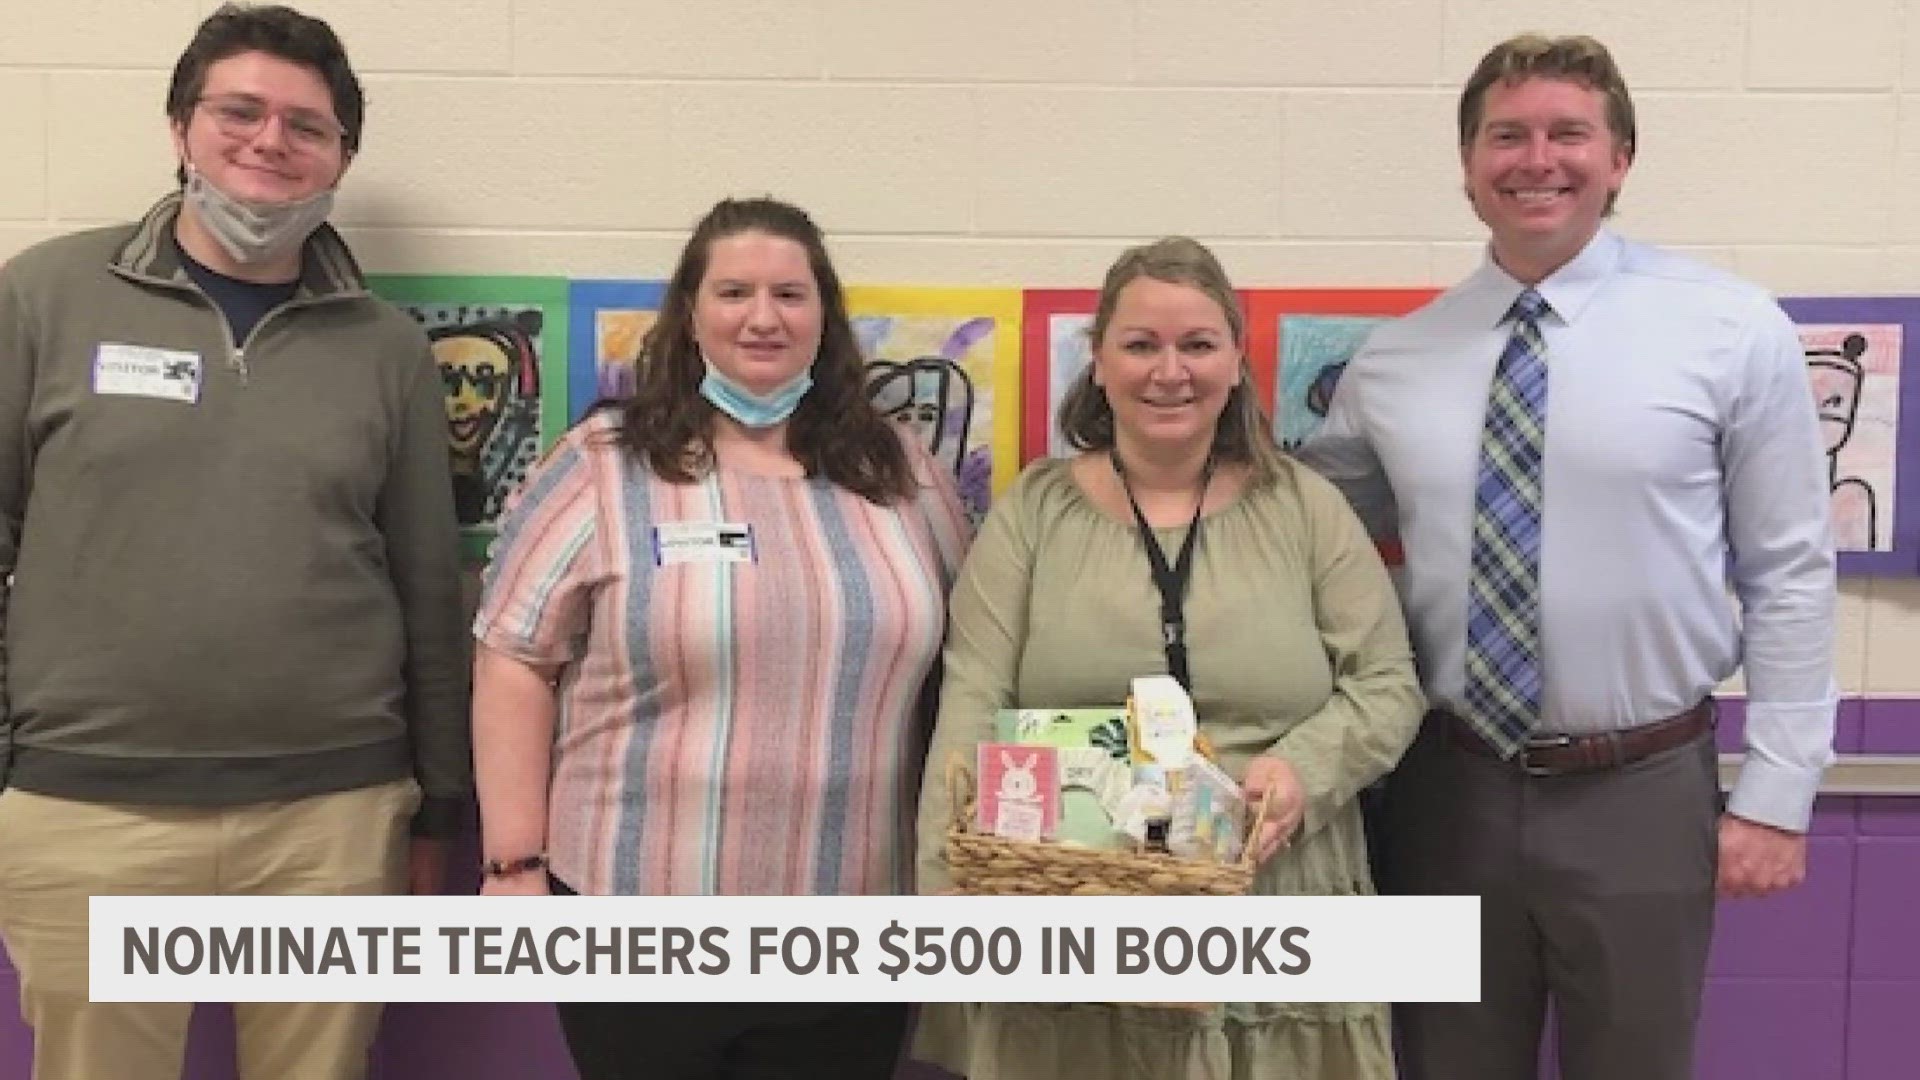 Nominations are being accepted over the next couple of weeks offering teachers $500 to fill their classrooms with books.